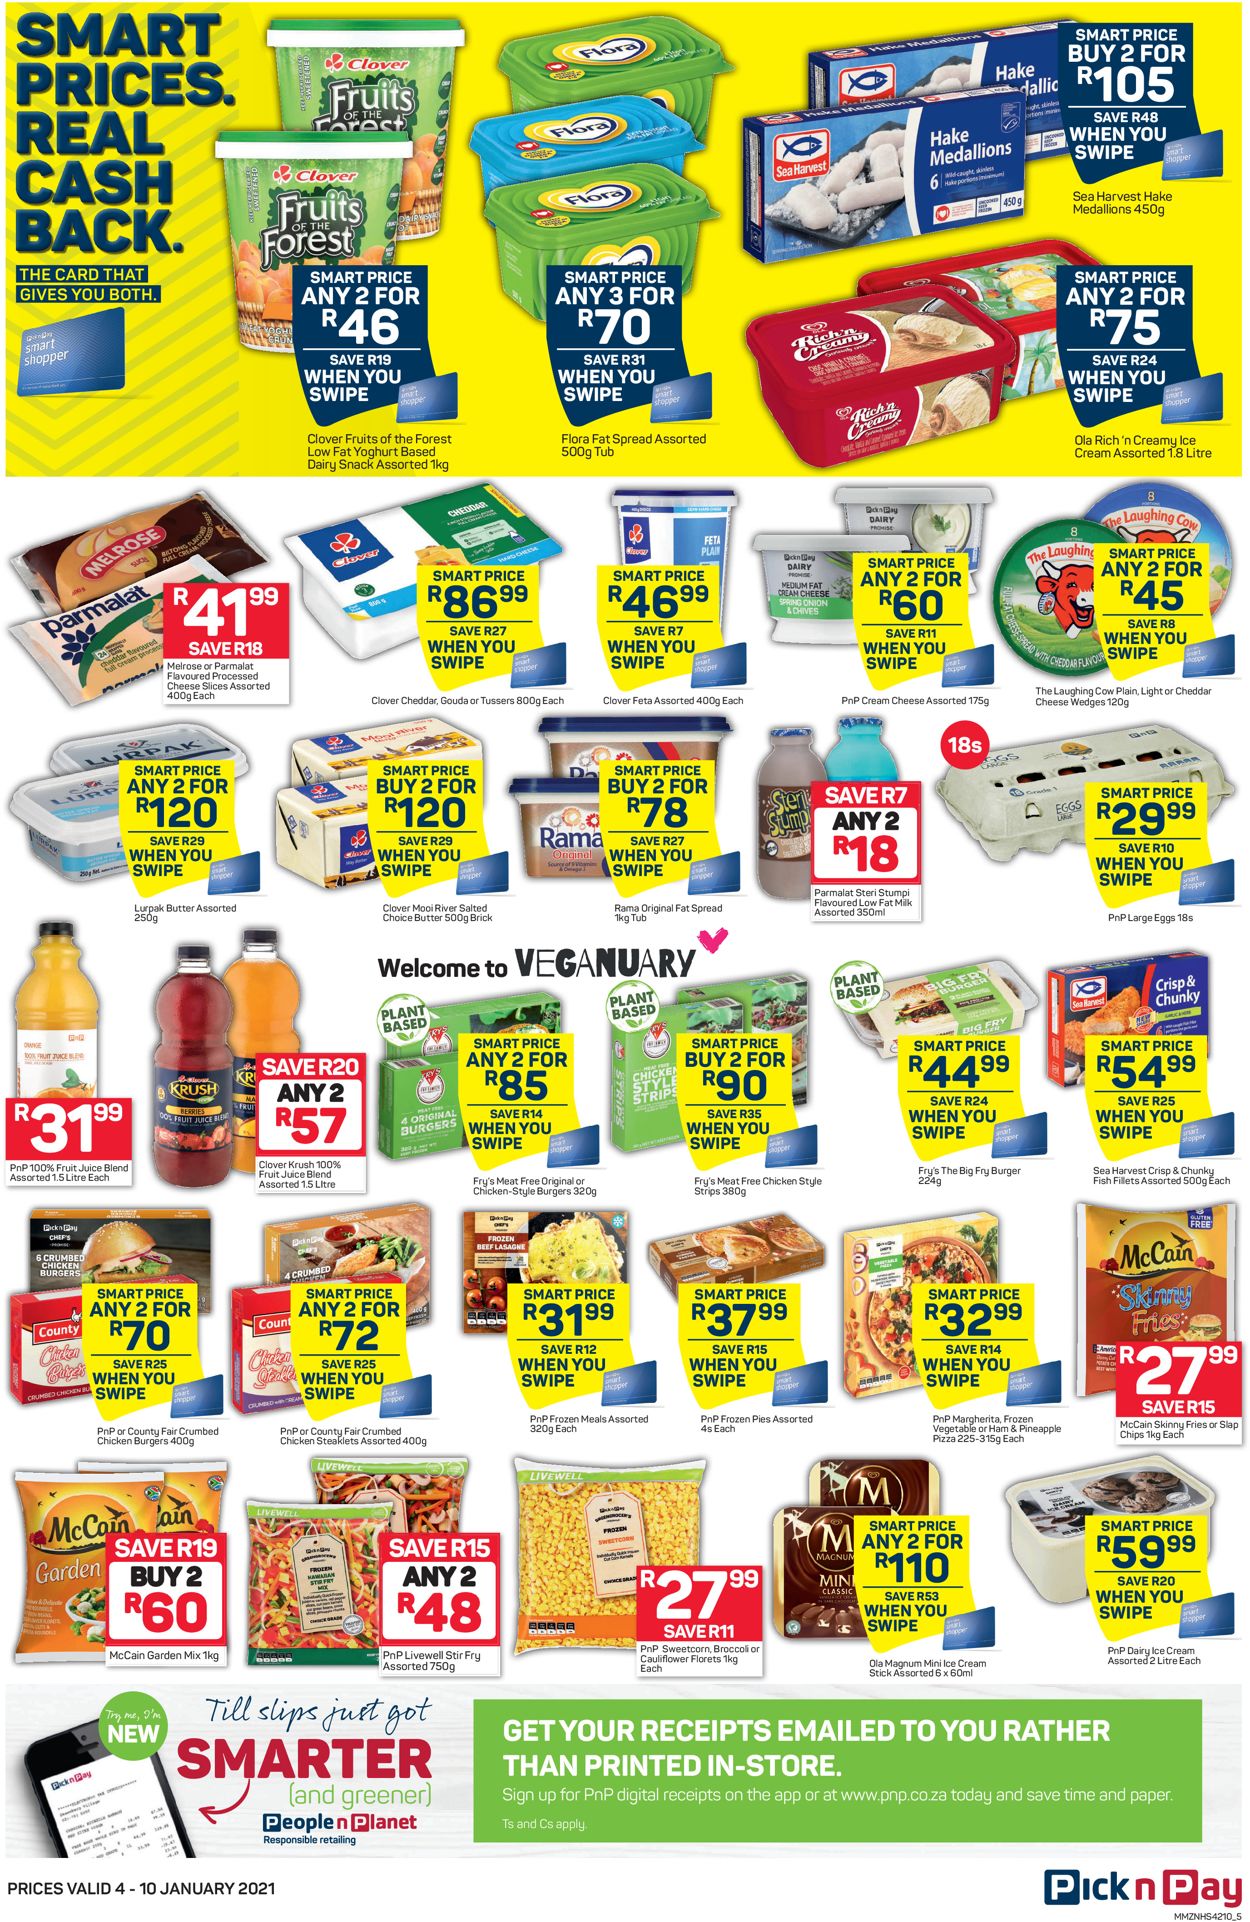 Pick n Pay Smart Price 2021 Catalogue - 2021/01/04-2021/01/10 (Page 5)